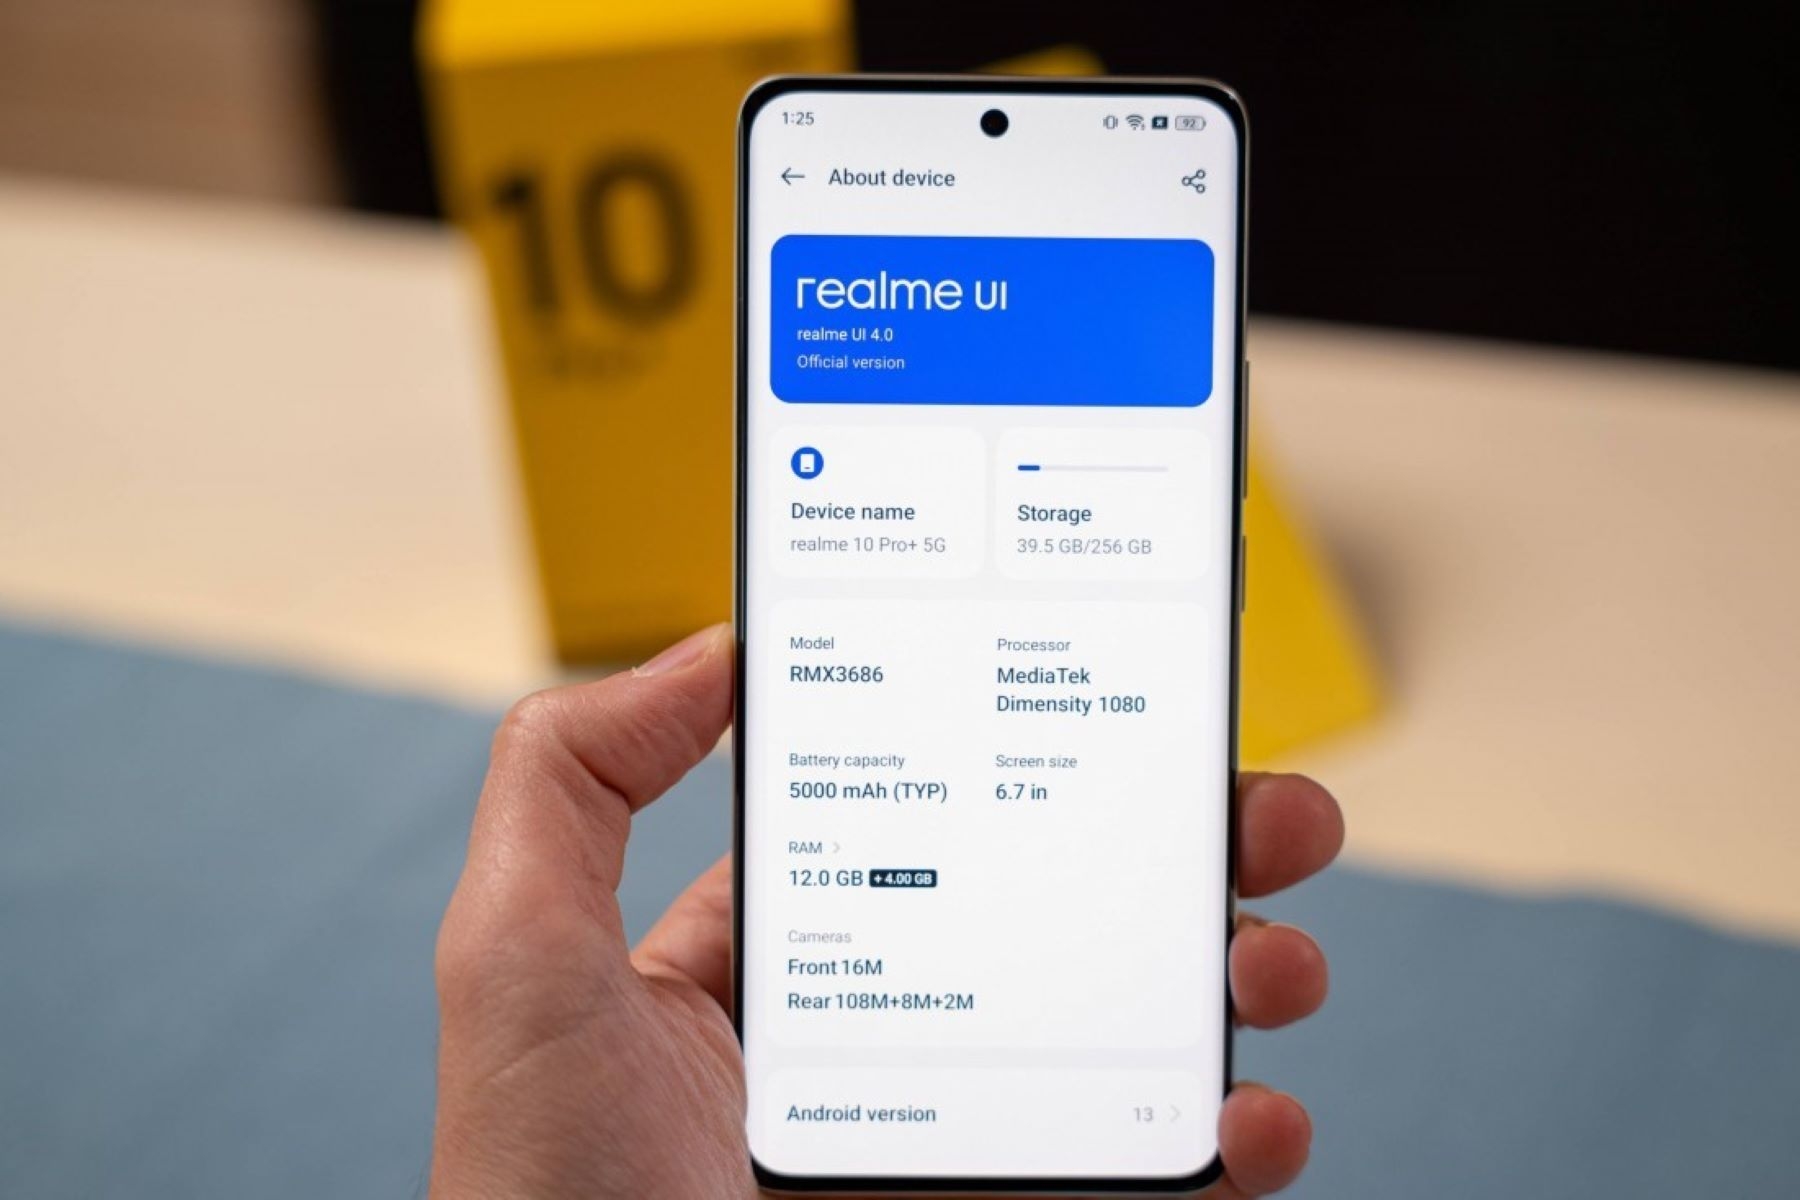 removing-realme-ui-update-step-by-step-guide